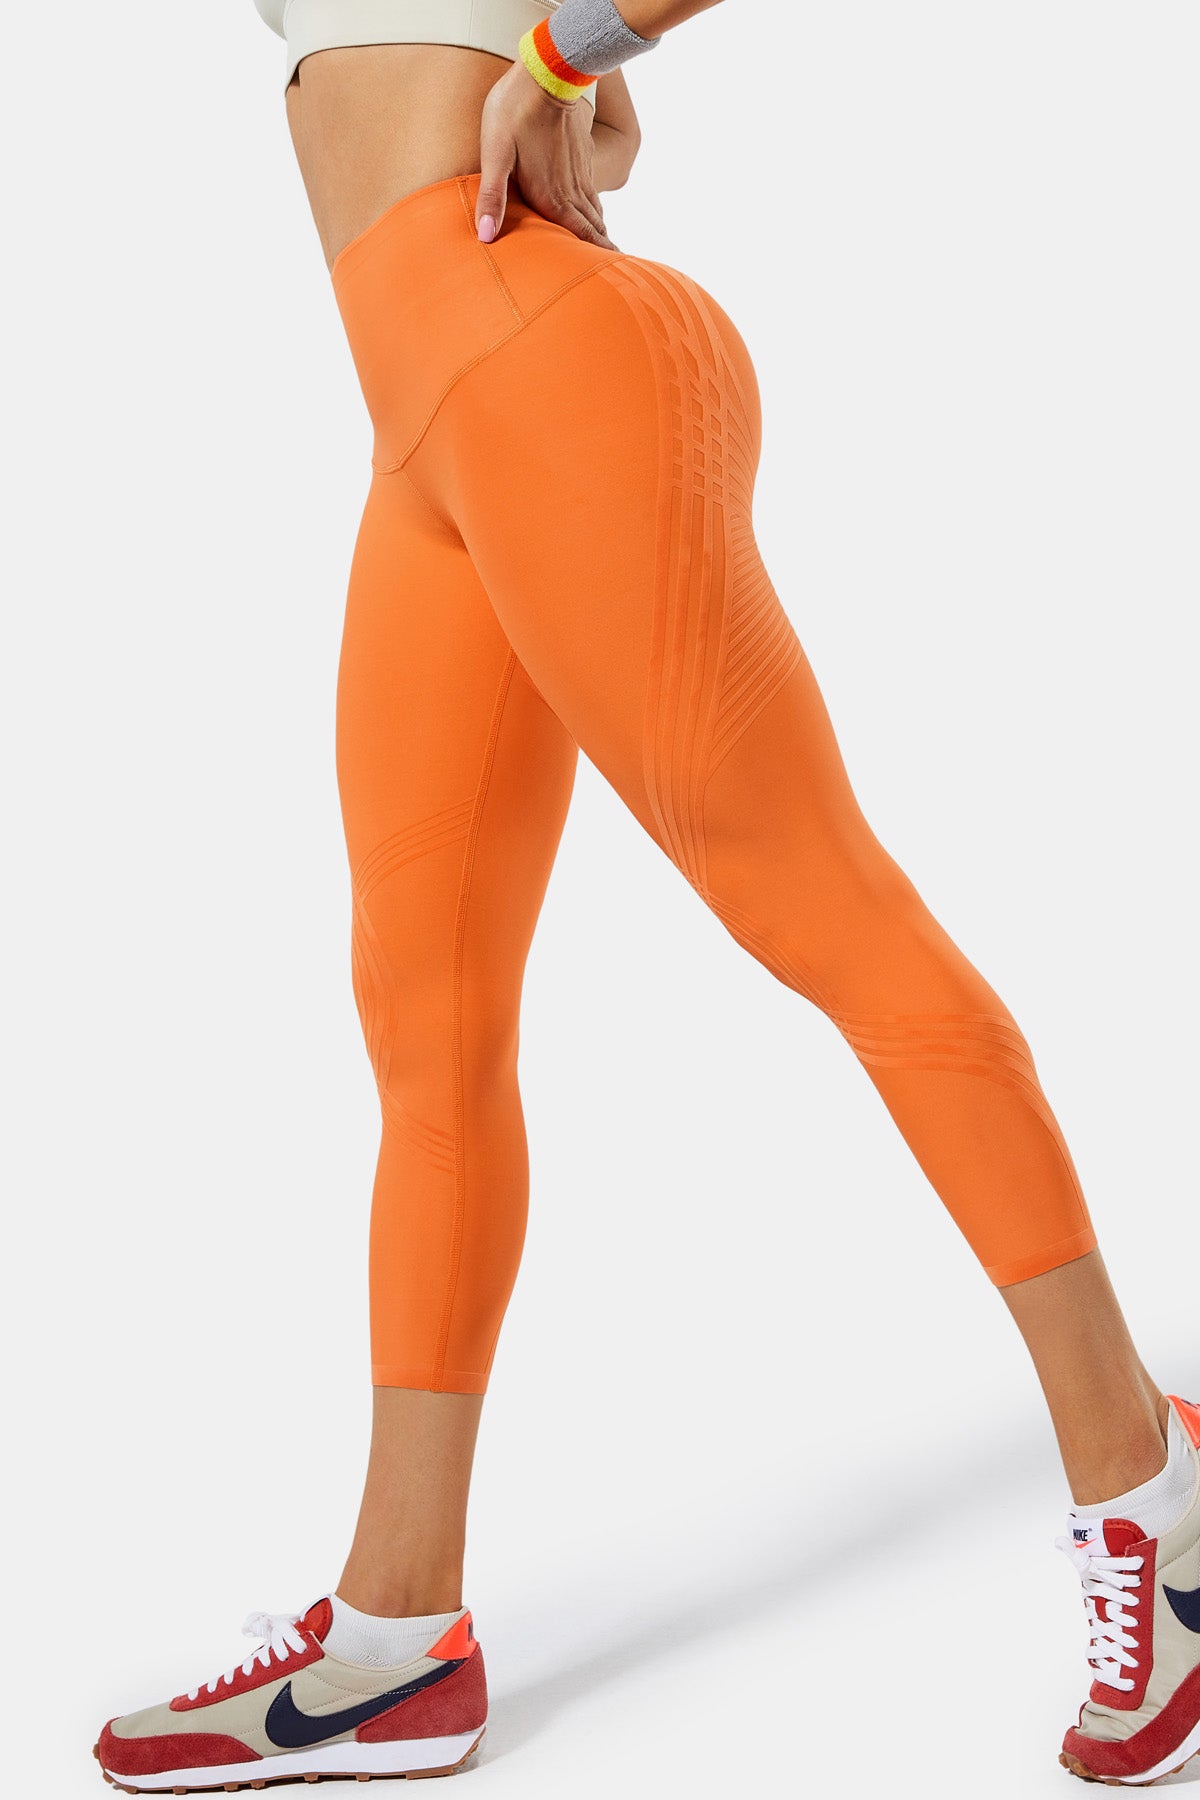 WomanHealthBlogs-These Body Sculpting Leggings Designed For Thick Thi –  Fanka